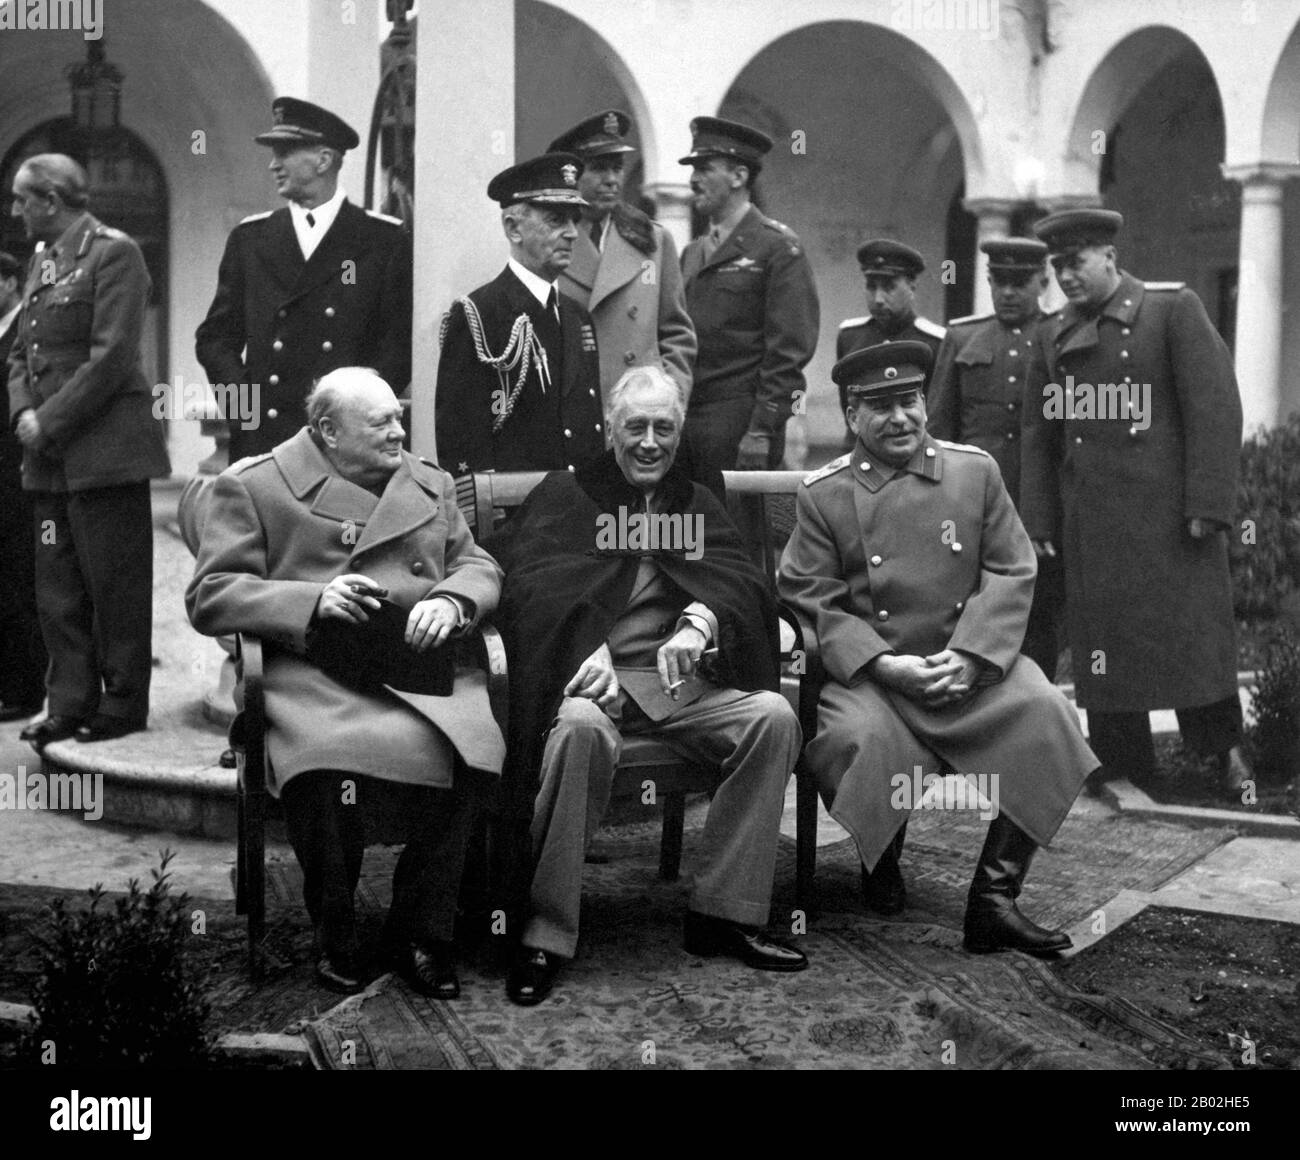 The Yalta Conference, sometimes called the Crimea Conference and codenamed the Argonaut Conference, held February 4–11, 1945, was the World War II meeting of the heads of government of the United States, the United Kingdom and the Soviet Union, represented by President Franklin D. Roosevelt, Prime Minister Winston Churchill and Premier Joseph Stalin, respectively, for the purpose of discussing Europe's post-war reorganization. The conference convened in the Livadia Palace near Yalta in Crimea.  The meeting was intended mainly to discuss the re-establishment of the nations of war-torn Europe. W Stock Photo